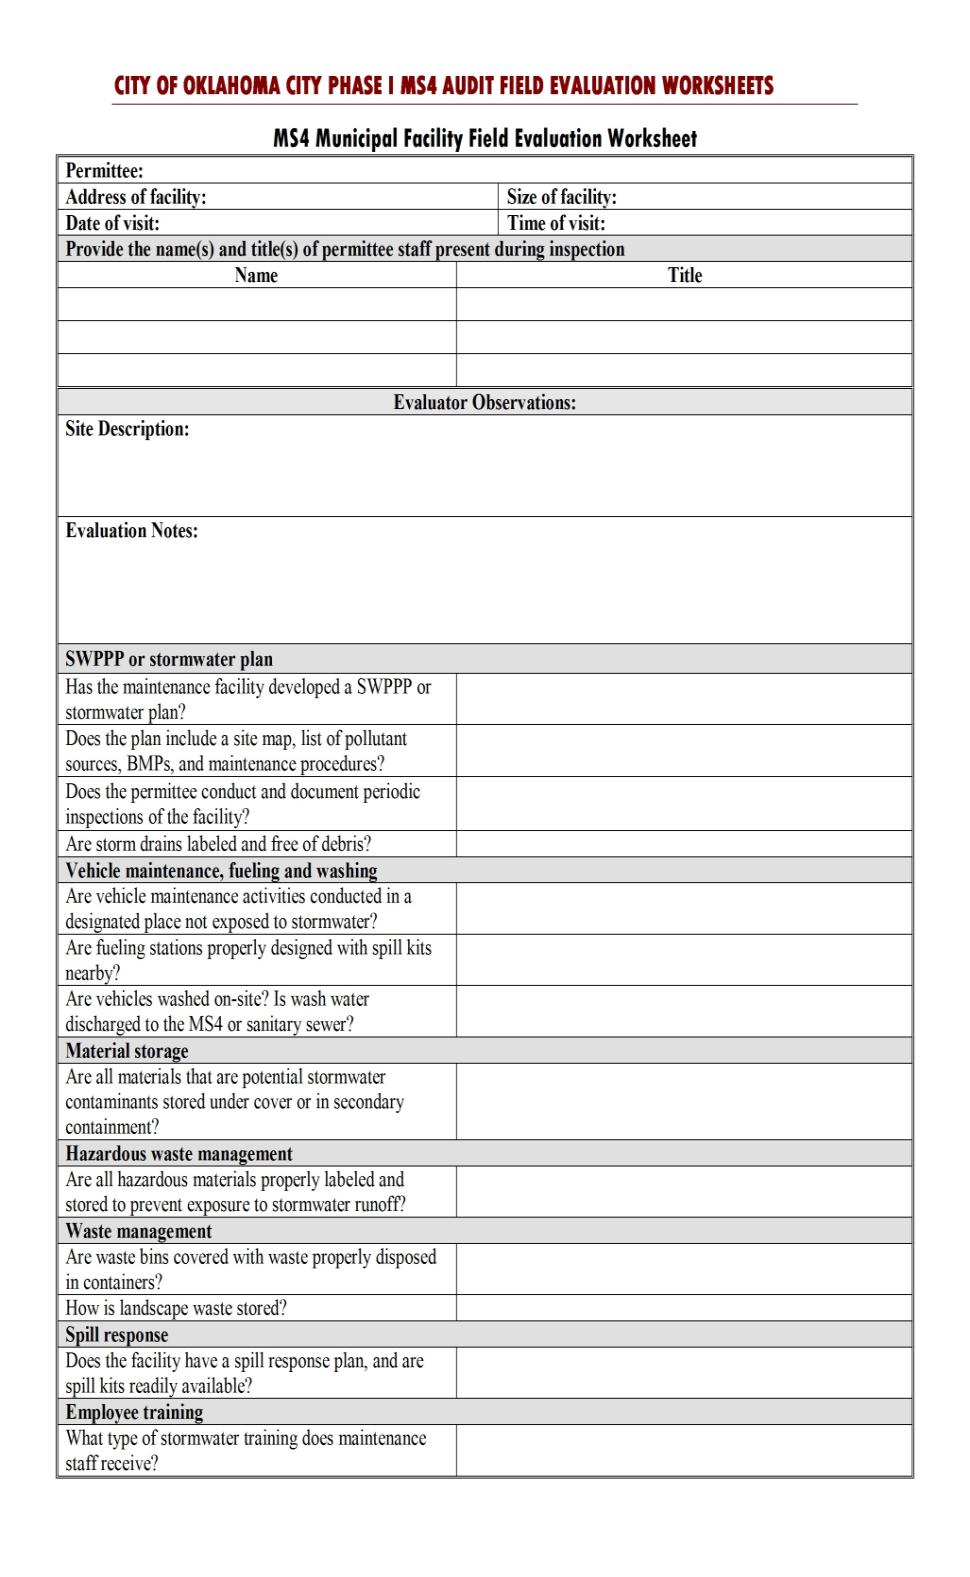 Field Activities Evaluation worksheets used Interaction between MS4 staff, other City departments, and regulated community